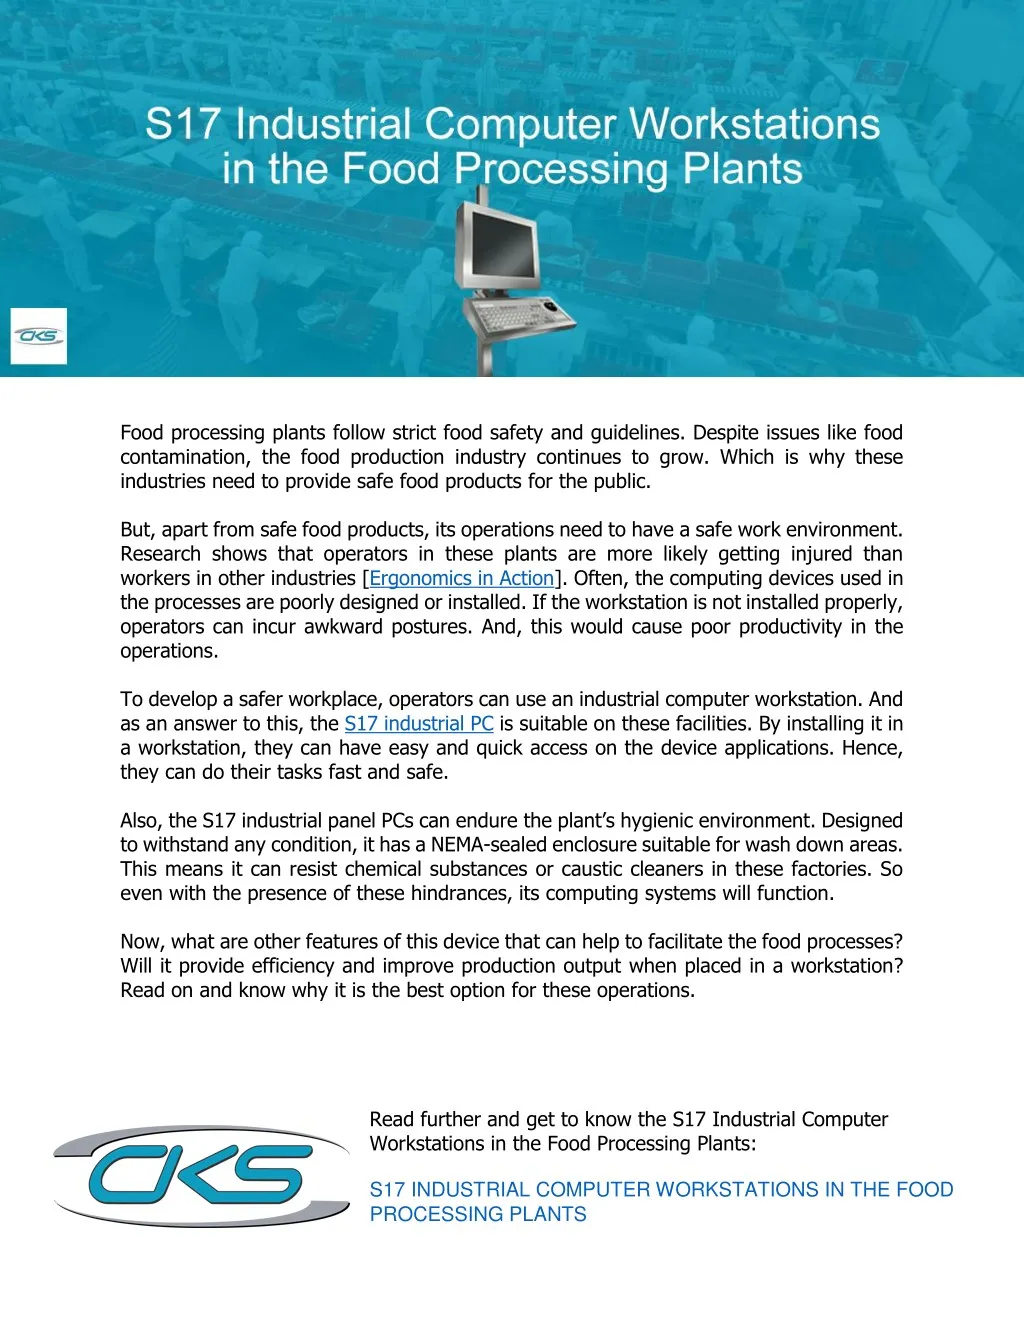 food processing plants follow strict food safety